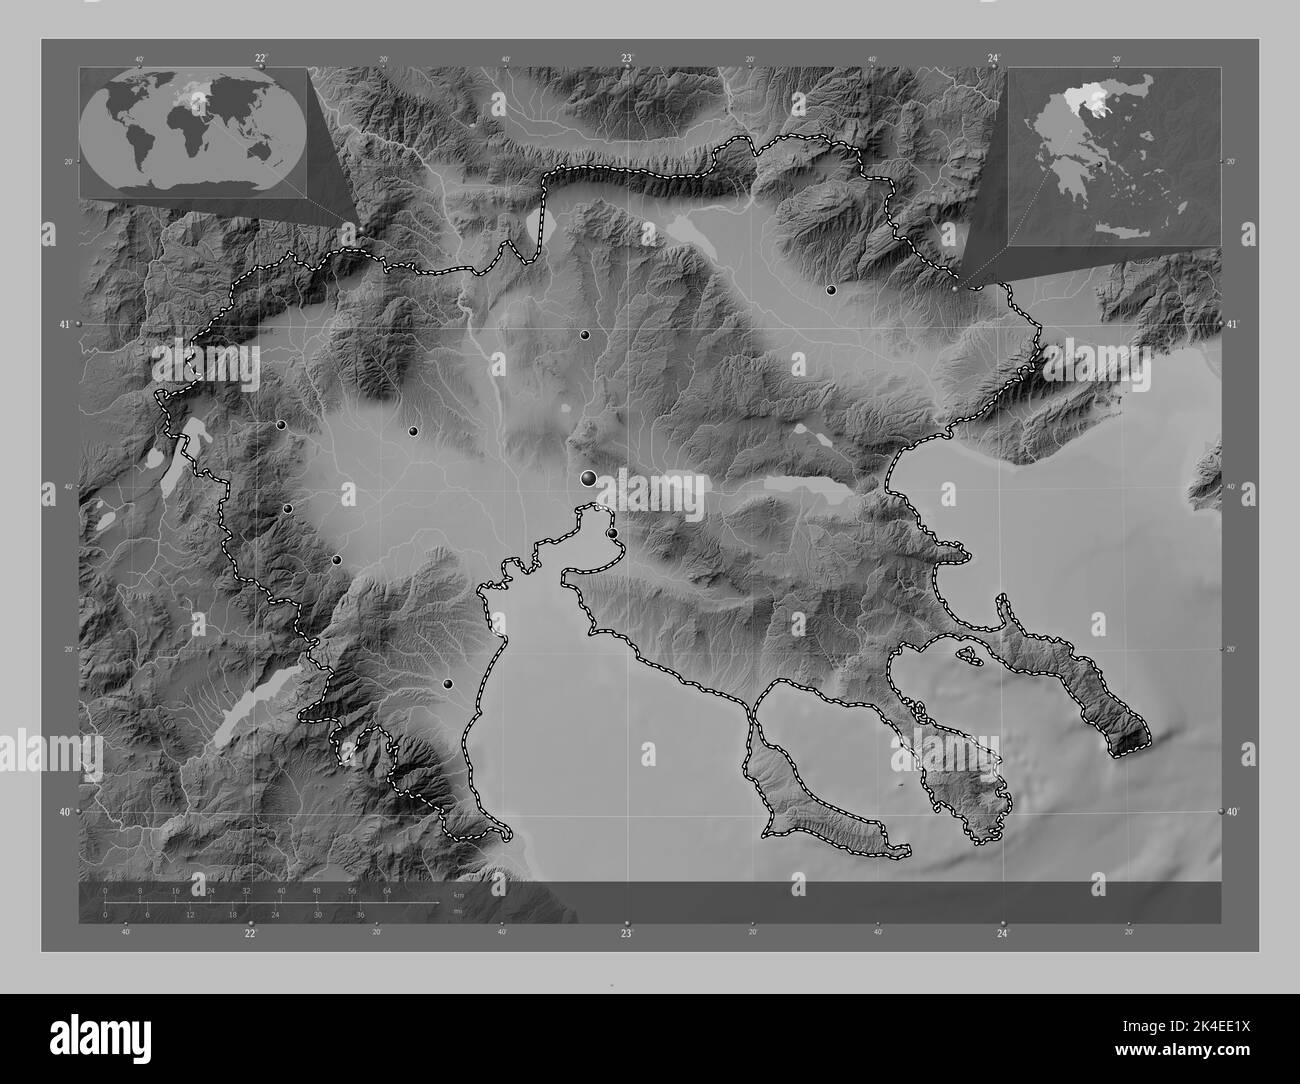 Central Macedonia, decentralized administration of Greece. Grayscale elevation map with lakes and rivers. Locations of major cities of the region. Cor Stock Photo